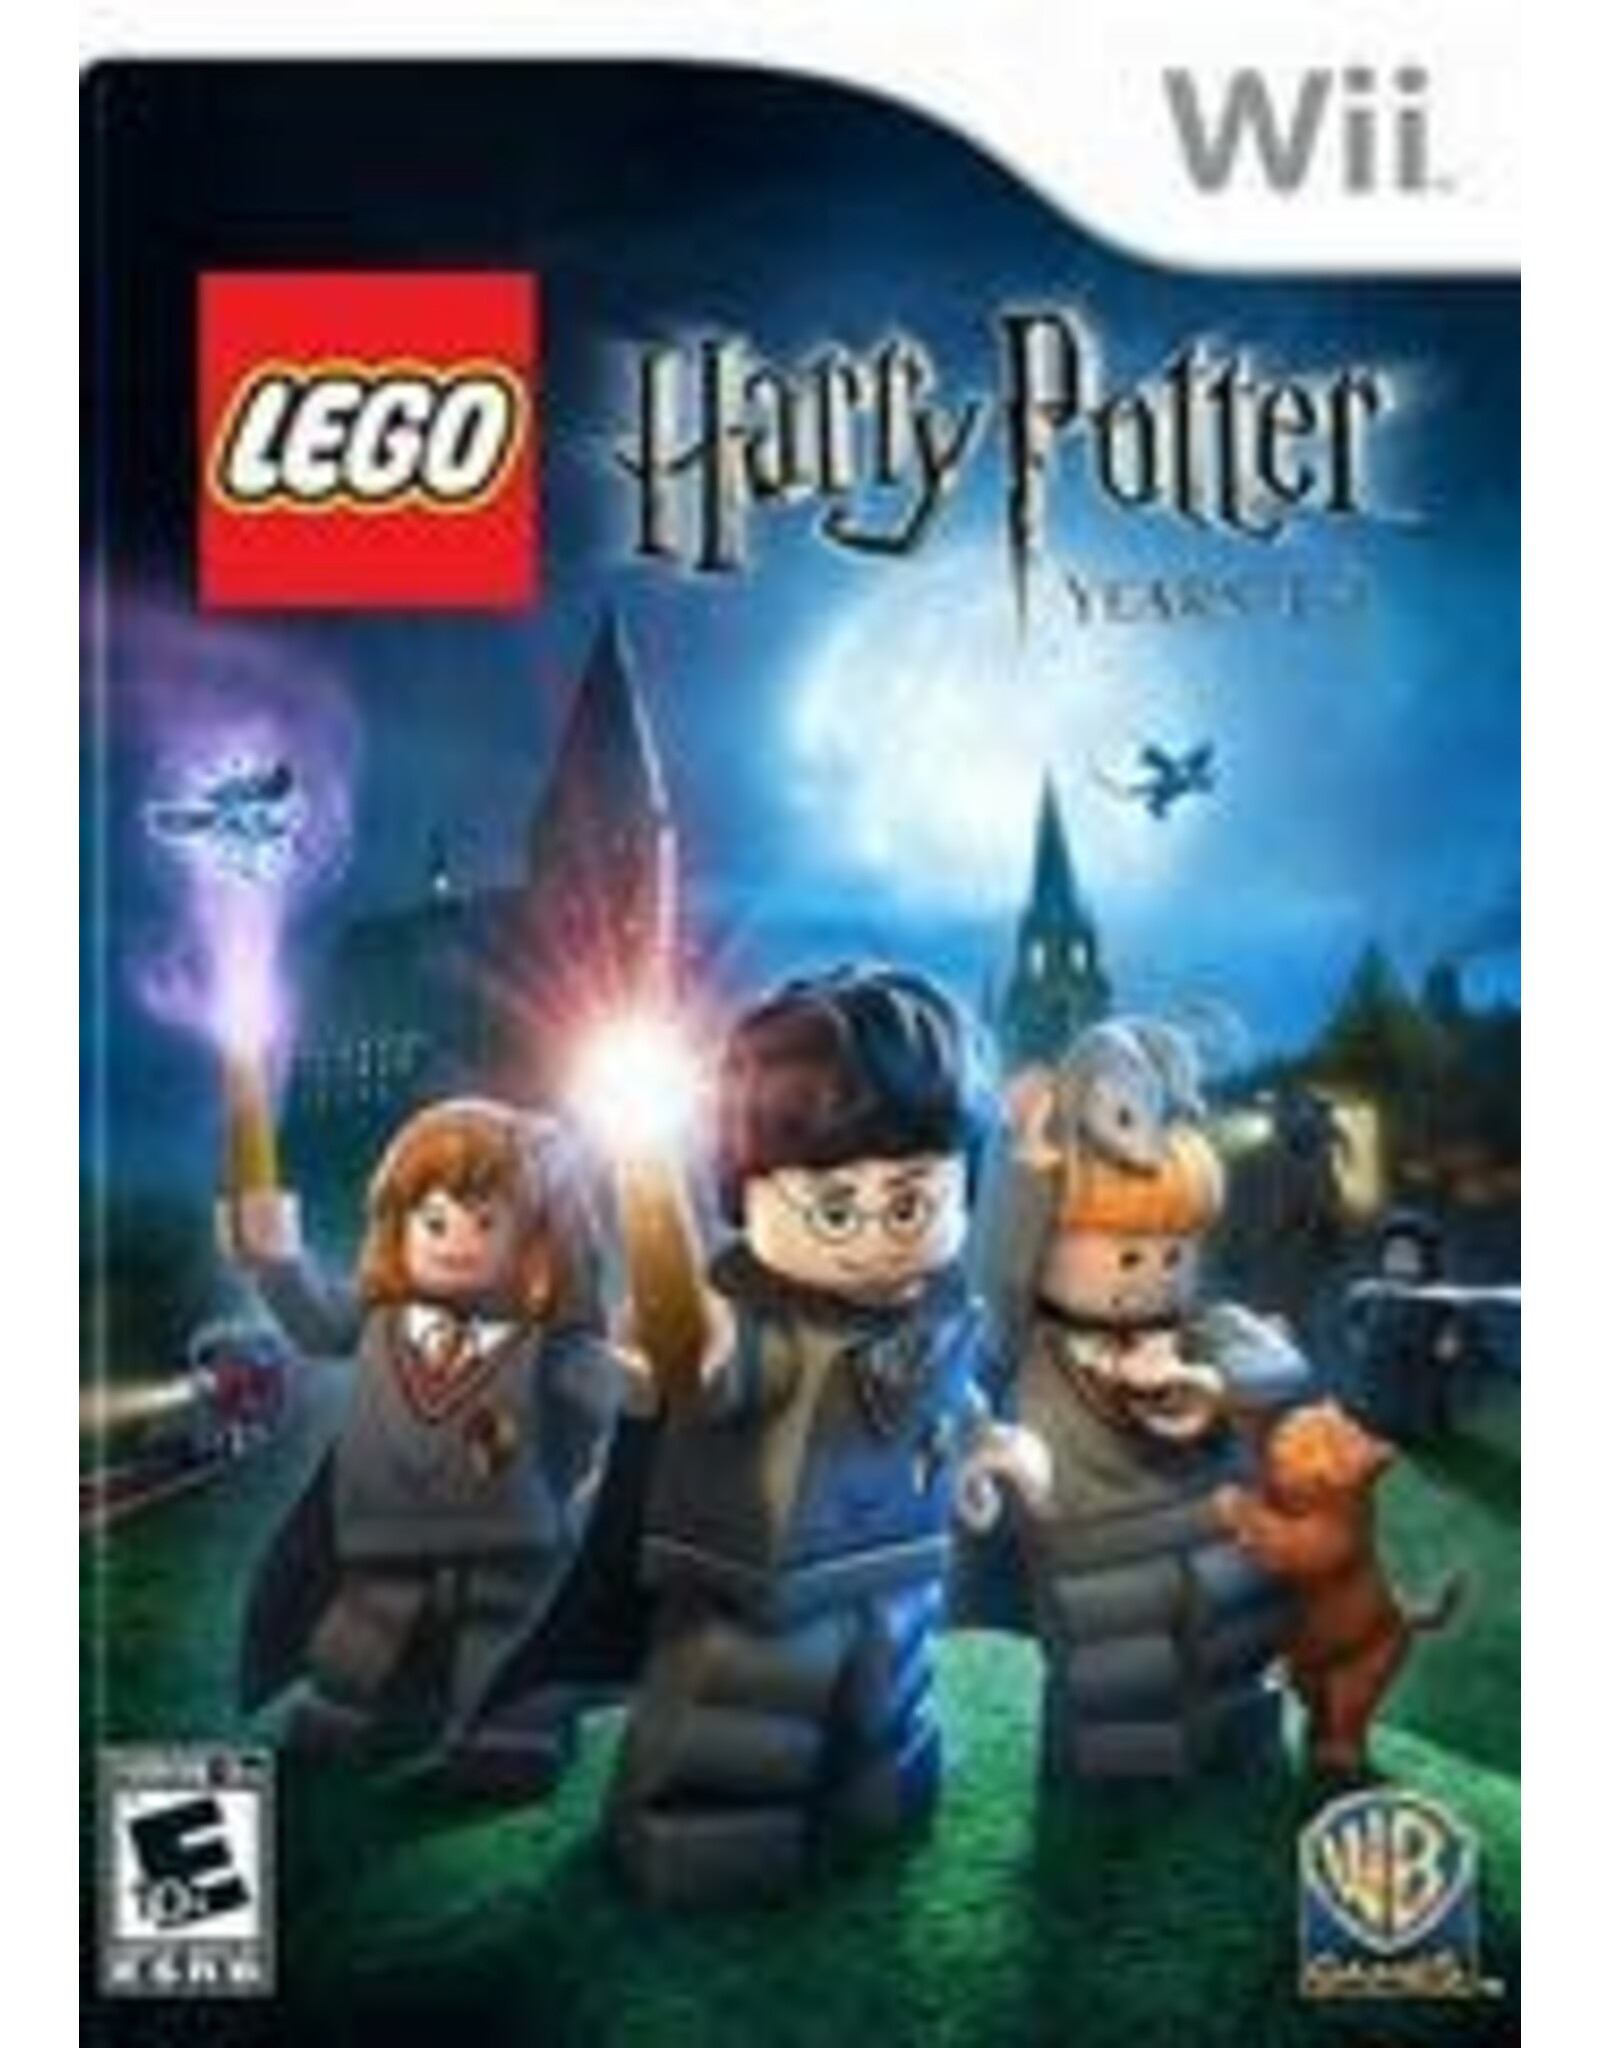 Wii LEGO Harry Potter: Years 1-4 (Used, Cosmetic Damage)